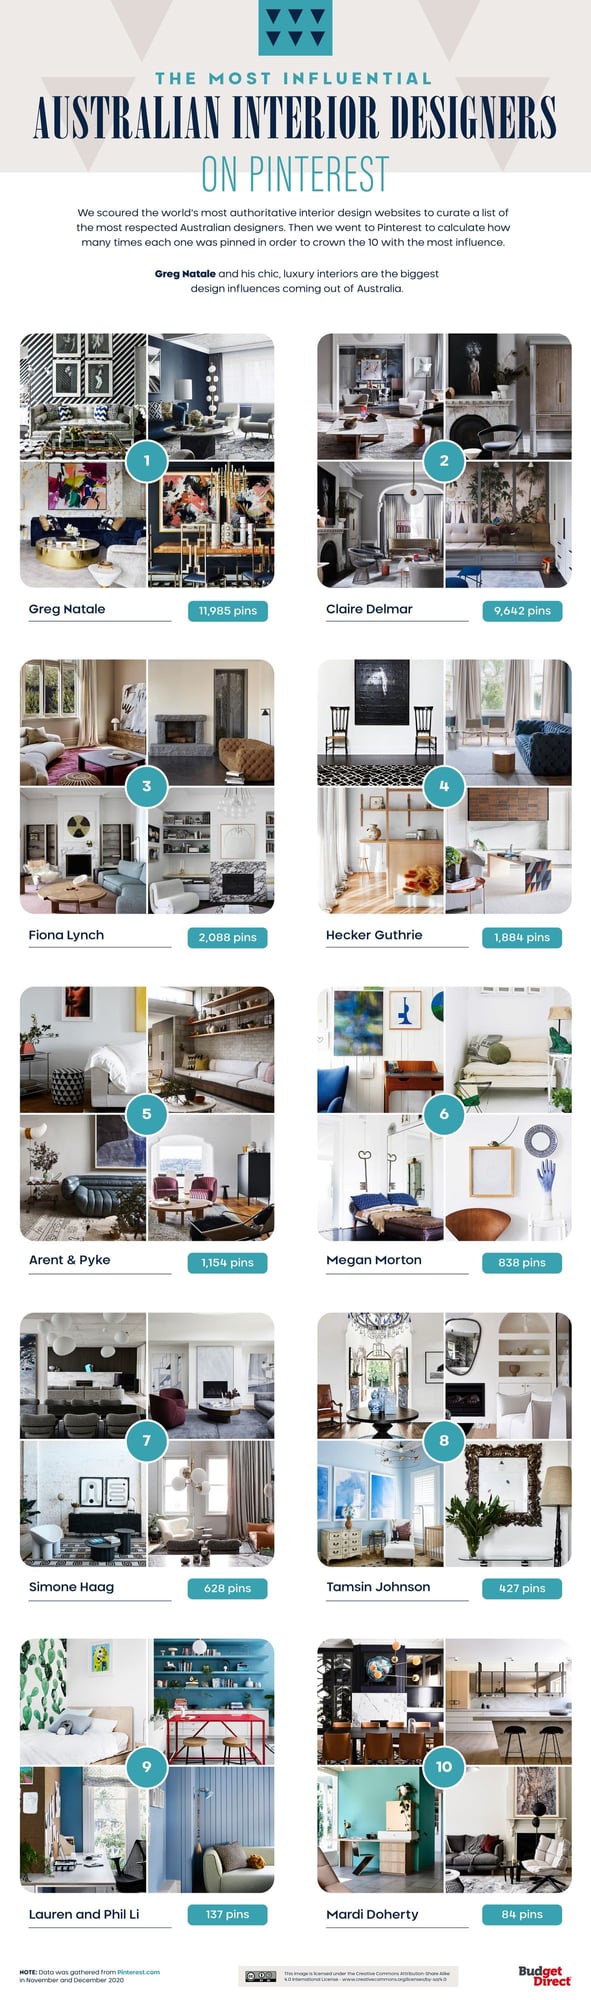 Budget Direct Home Insurance's Most Influential Australian Interior Designers on Pinterest